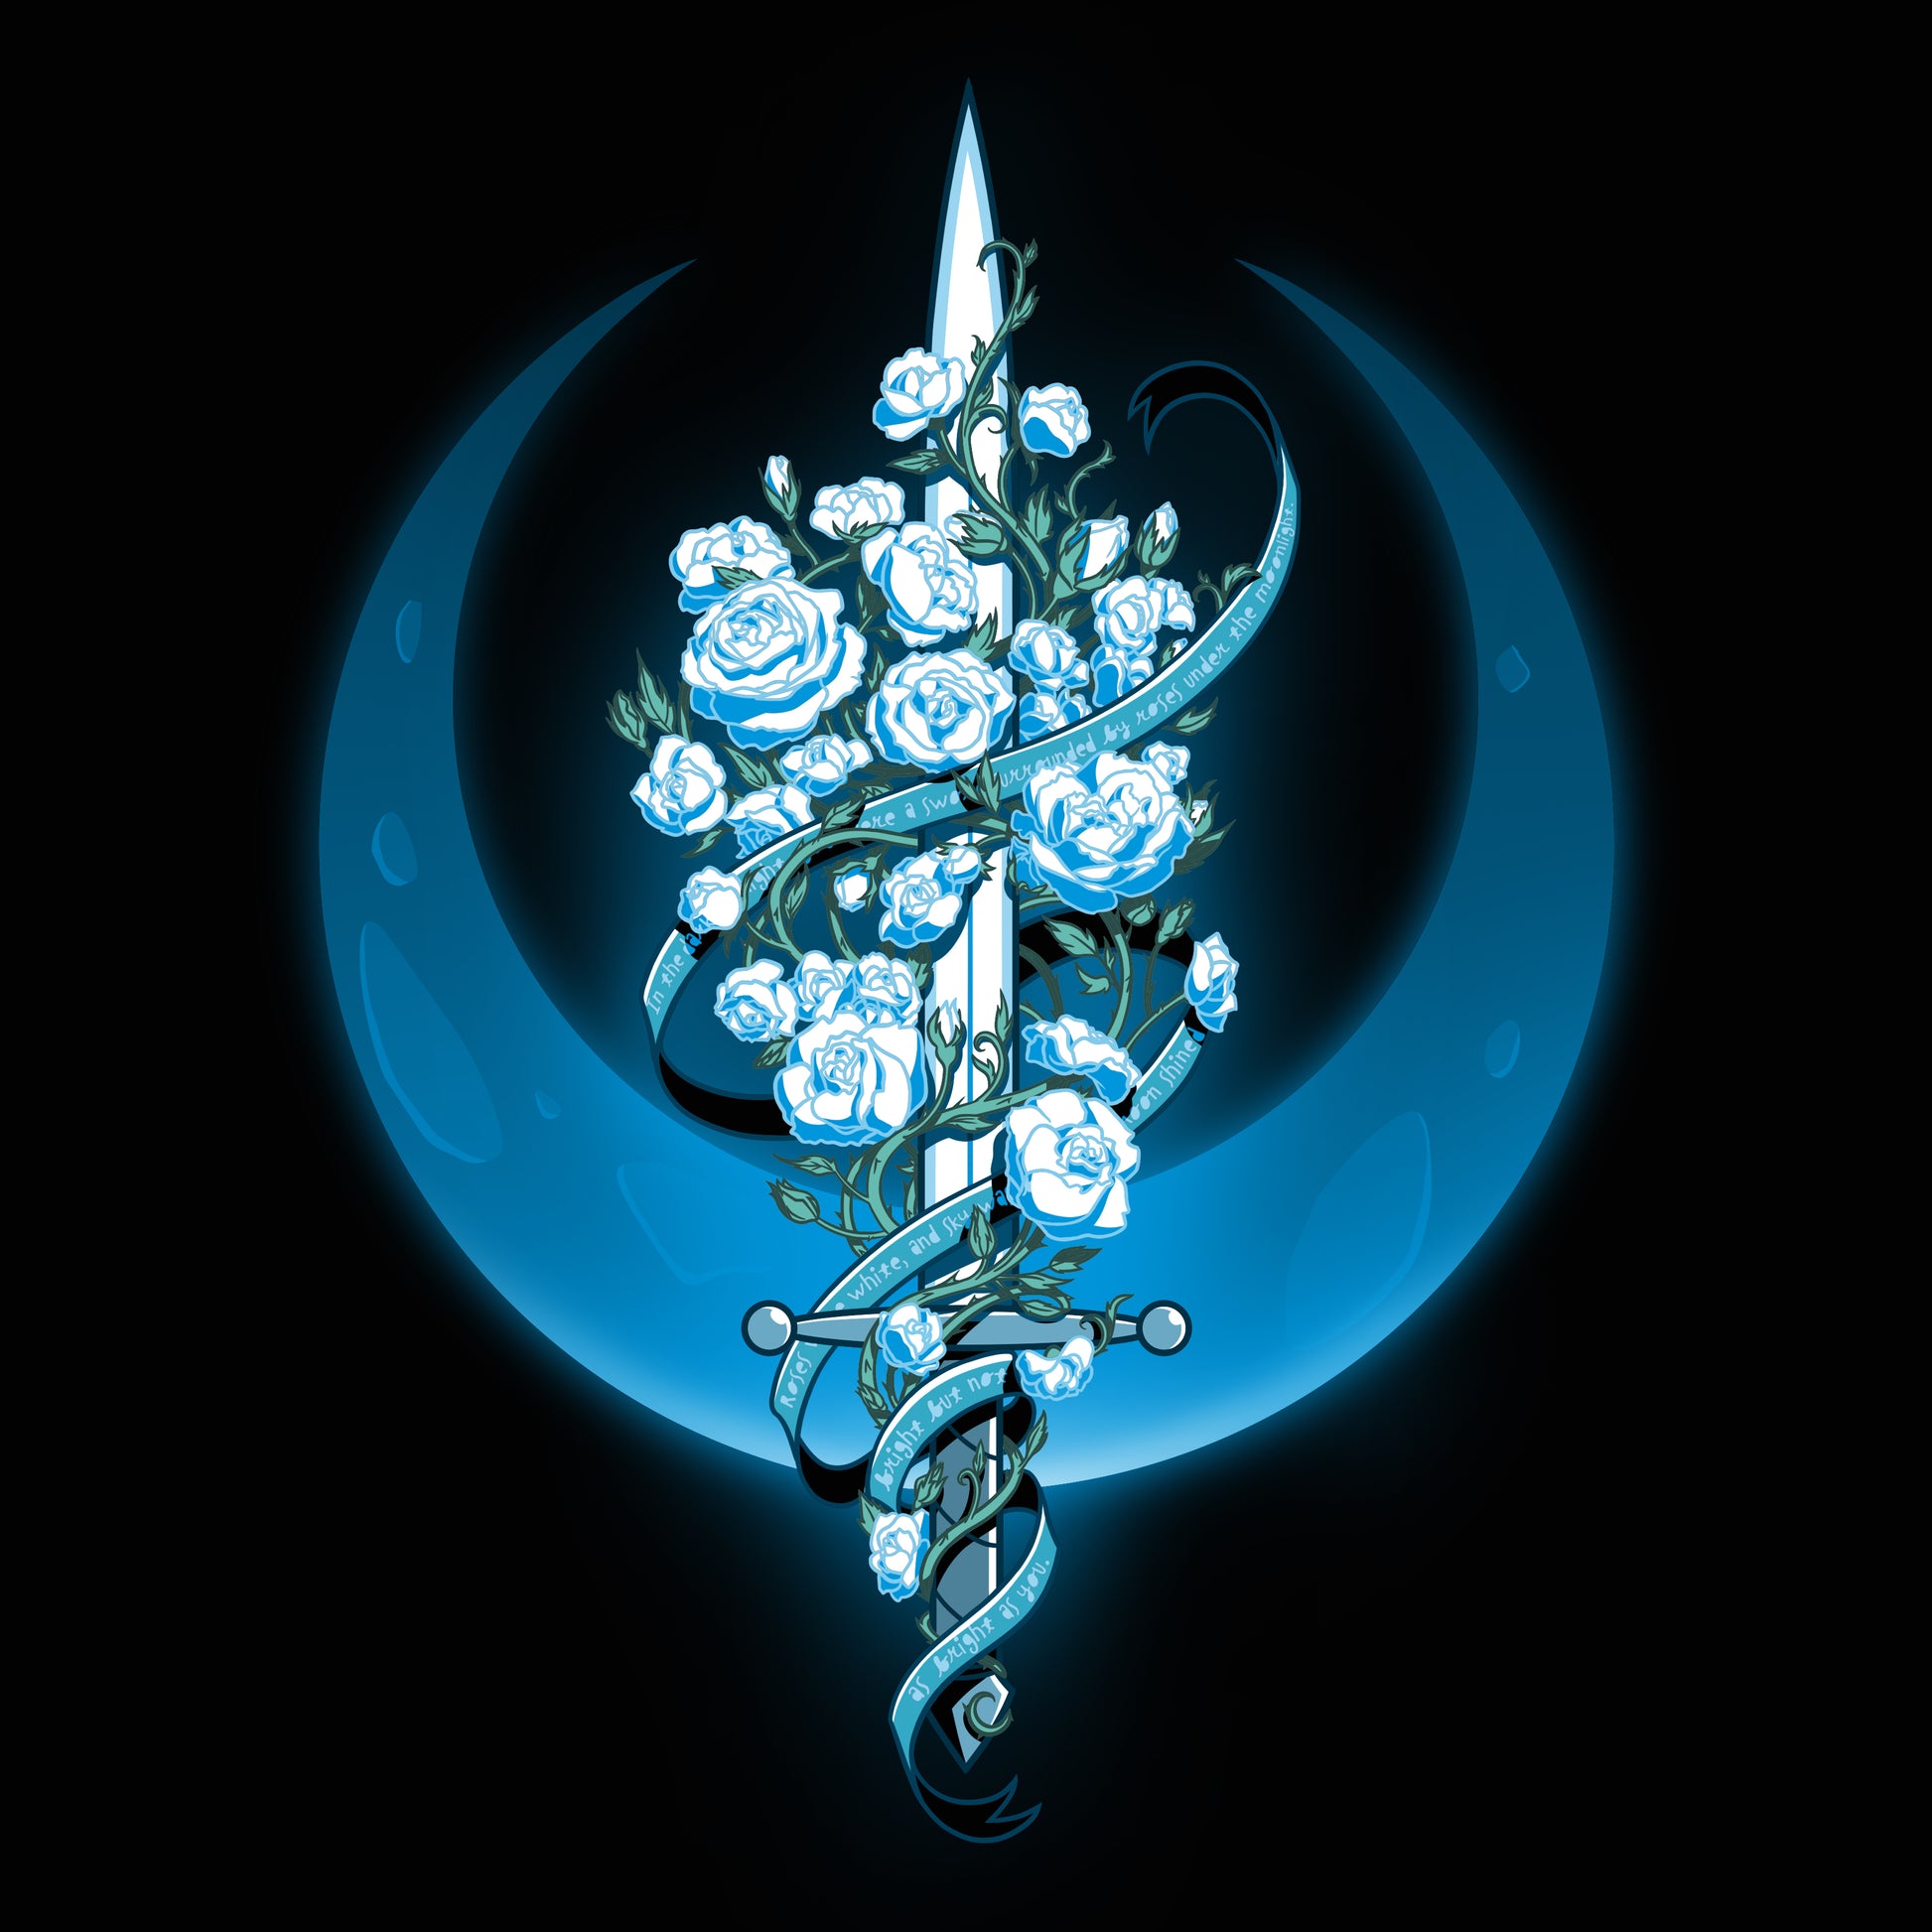 A Moonlit Blade of Roses adorned with roses by TeeTurtle.